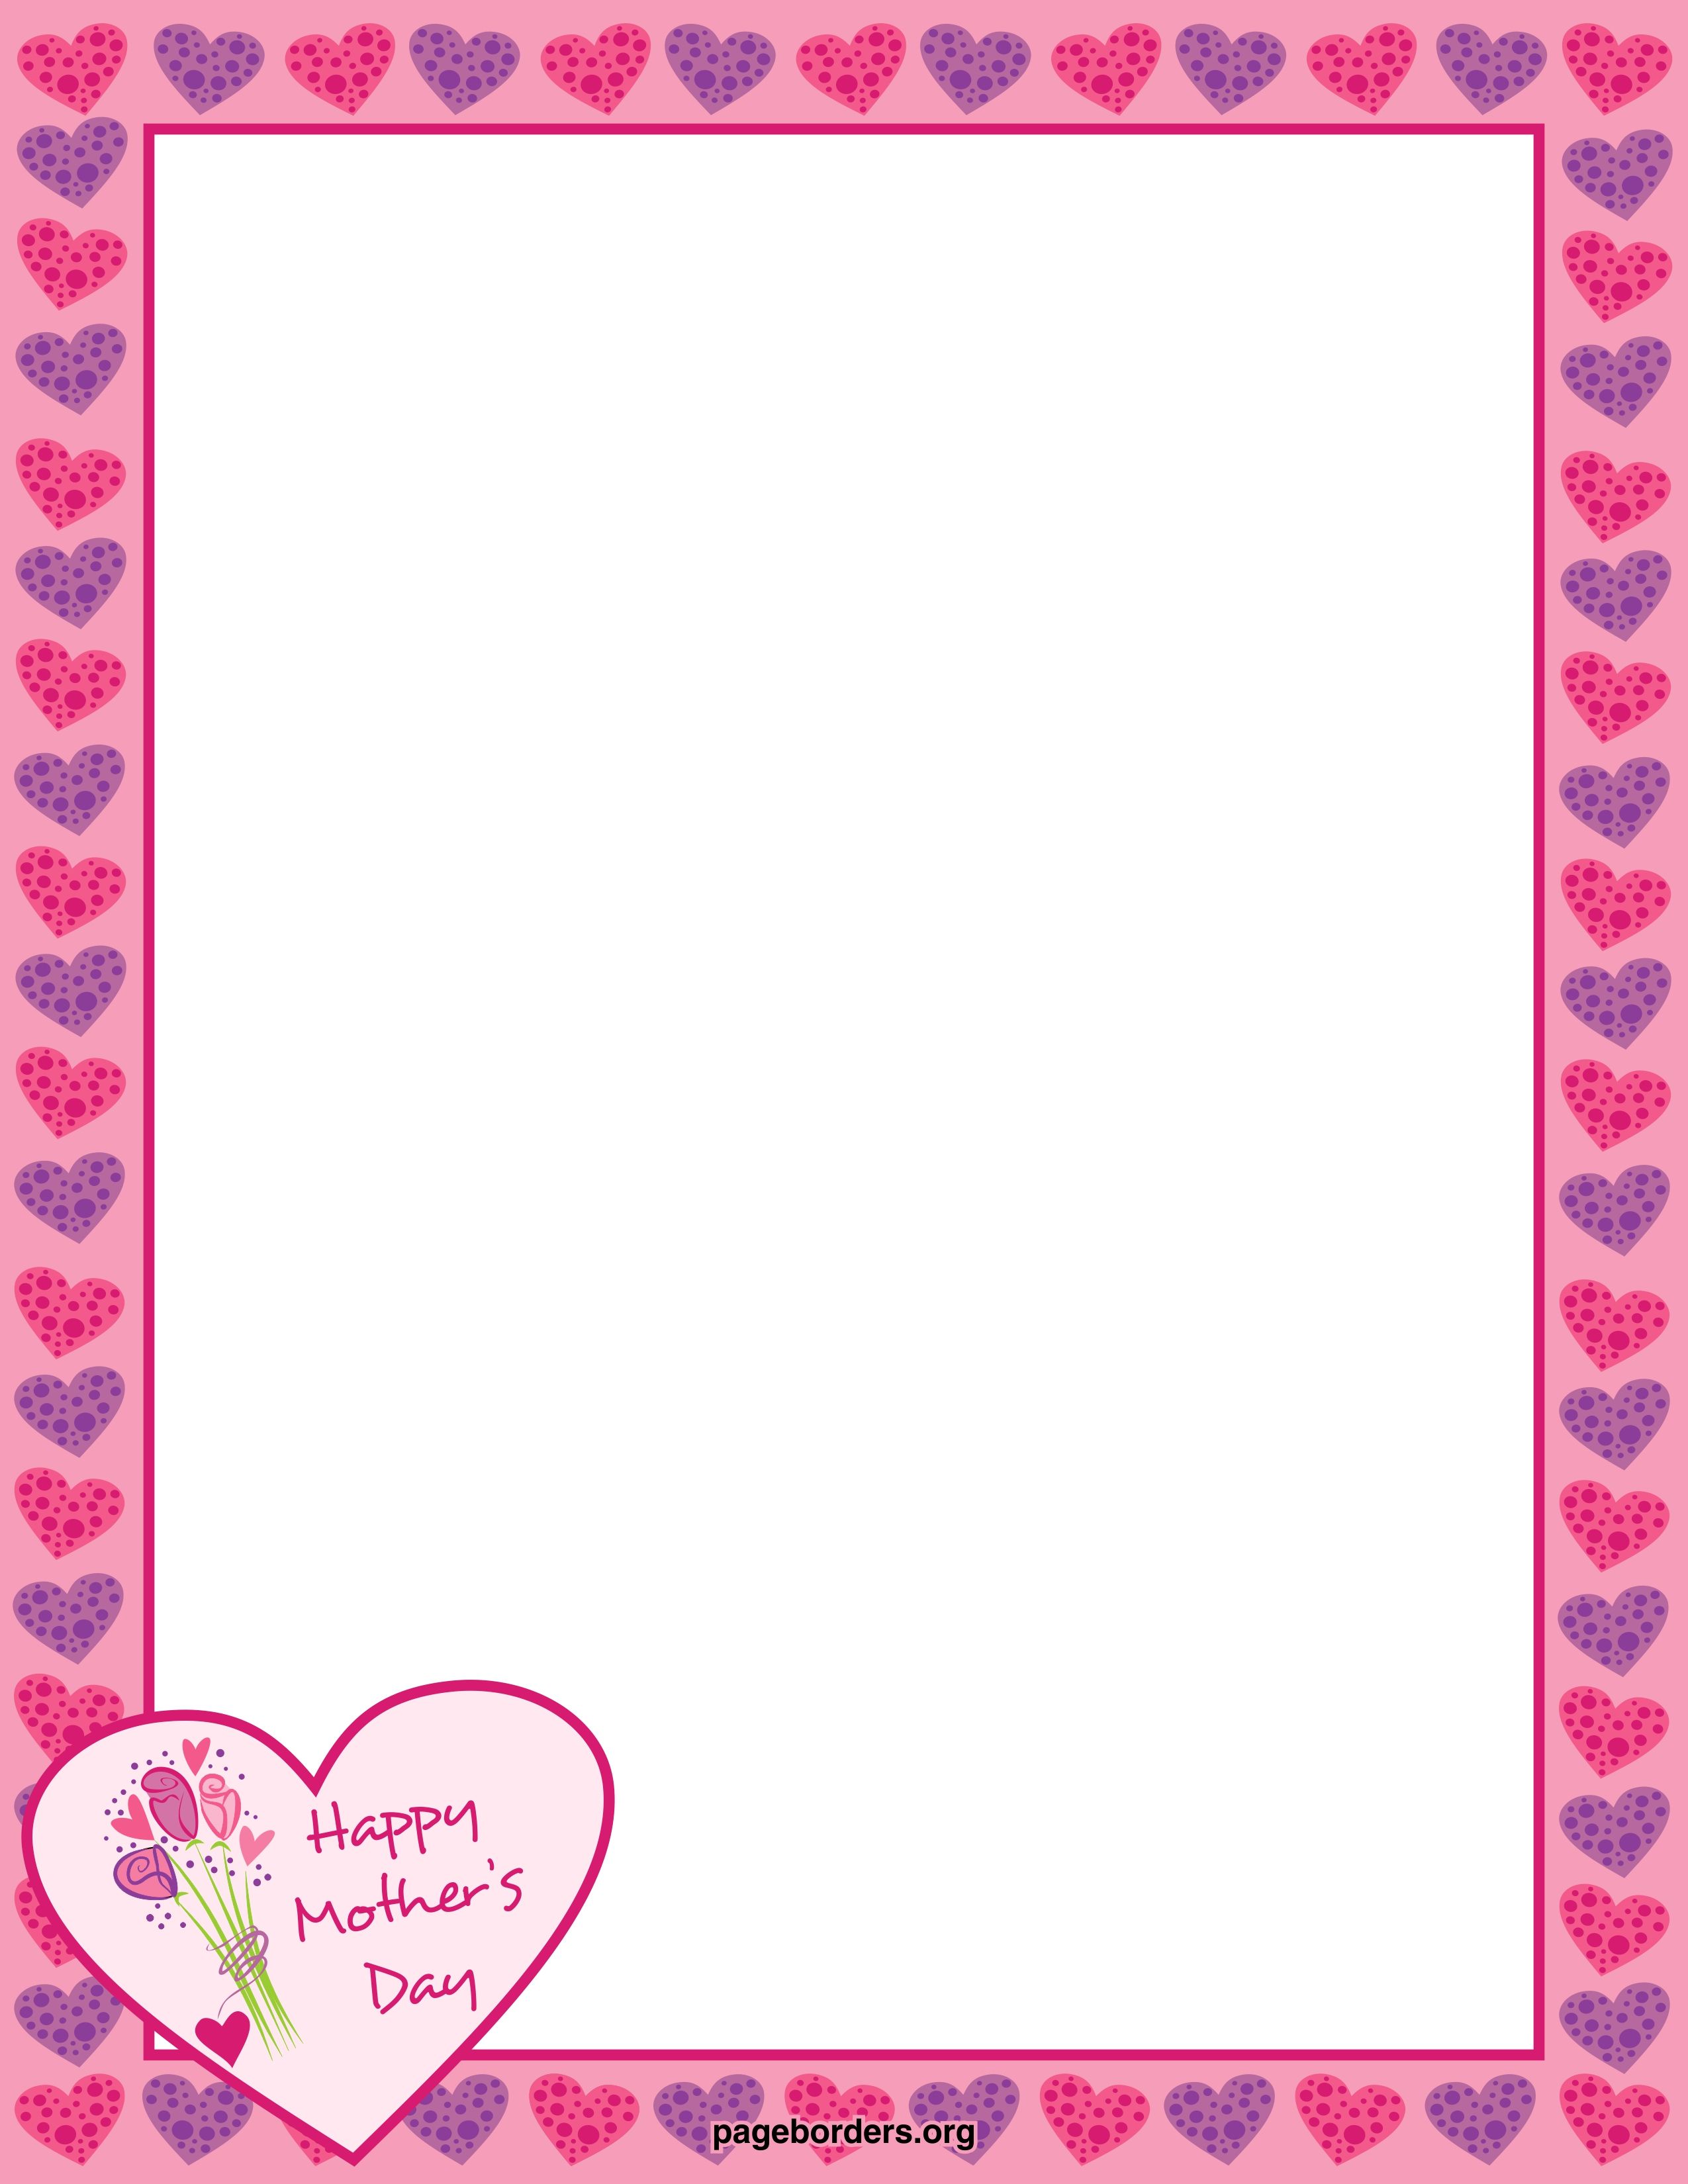 Mothers Day Border Png & Free Mothers Day Border.png.